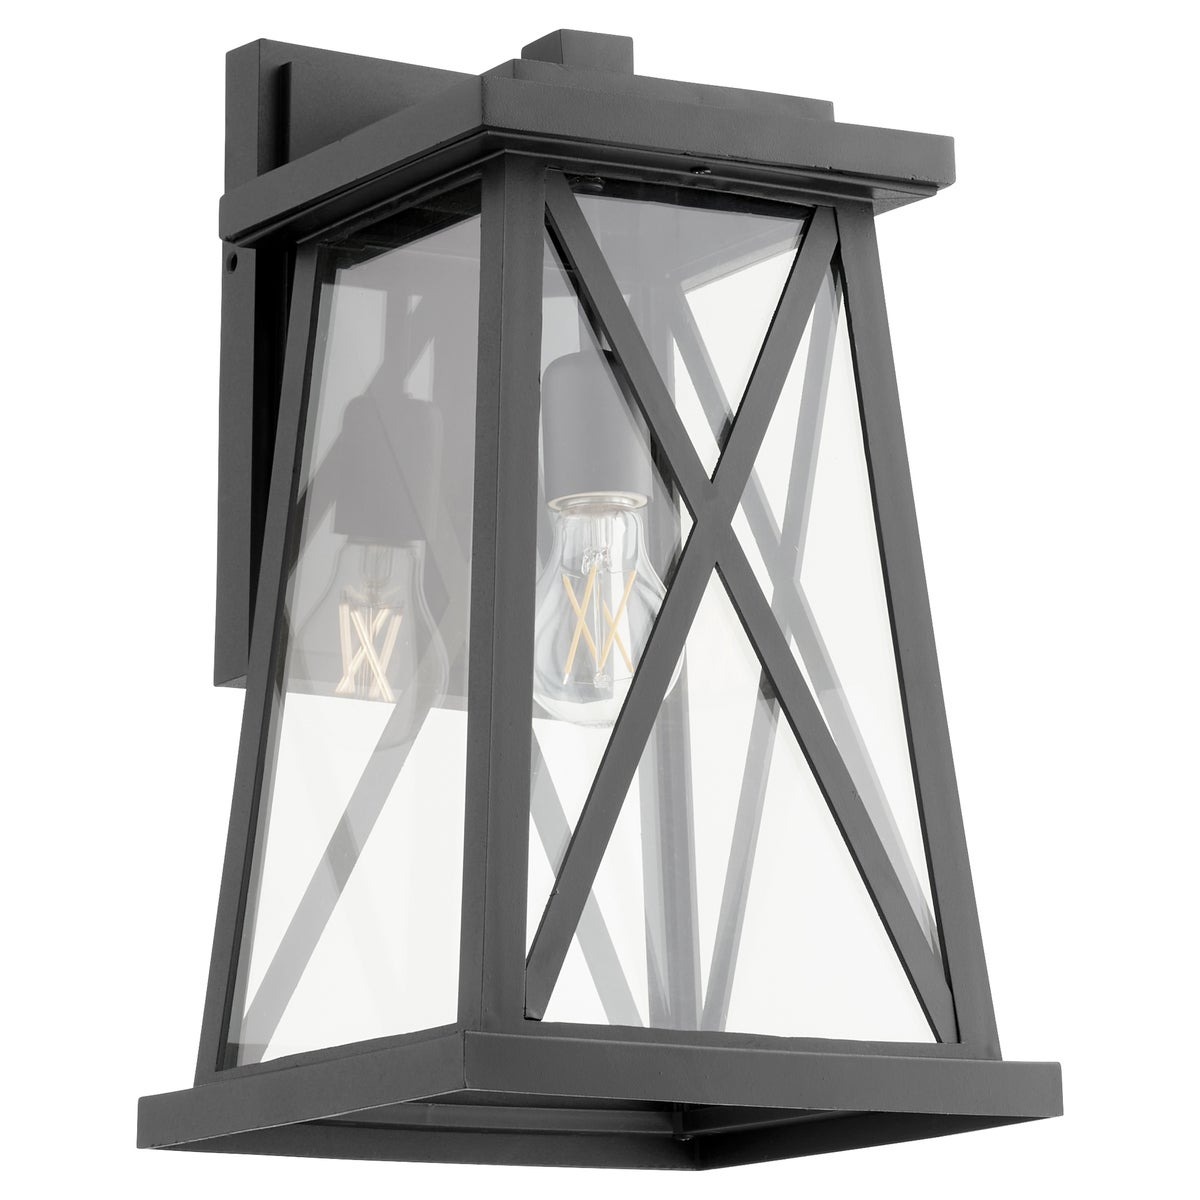 Black Outdoor Wall Light with X-brace design and glass. Warm glow cascades from this elegant fixture. Perfect for any outdoor space.